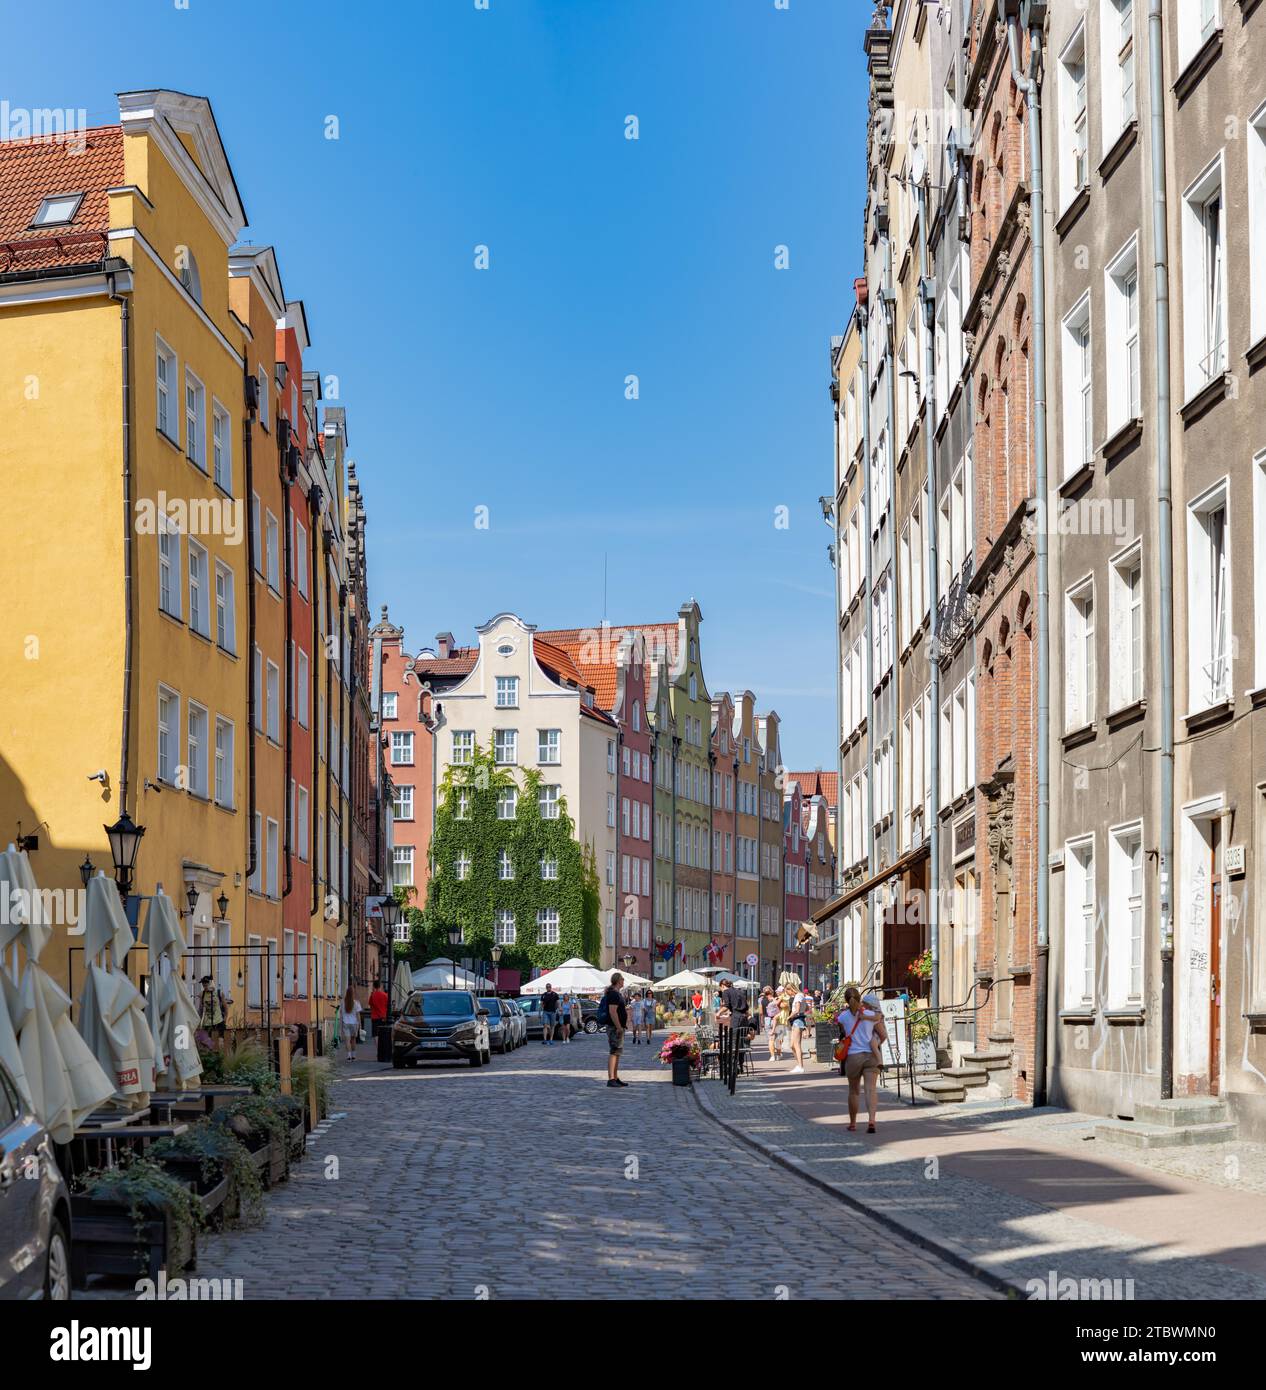 A picture of a colorful street in Gdansk Stock Photo